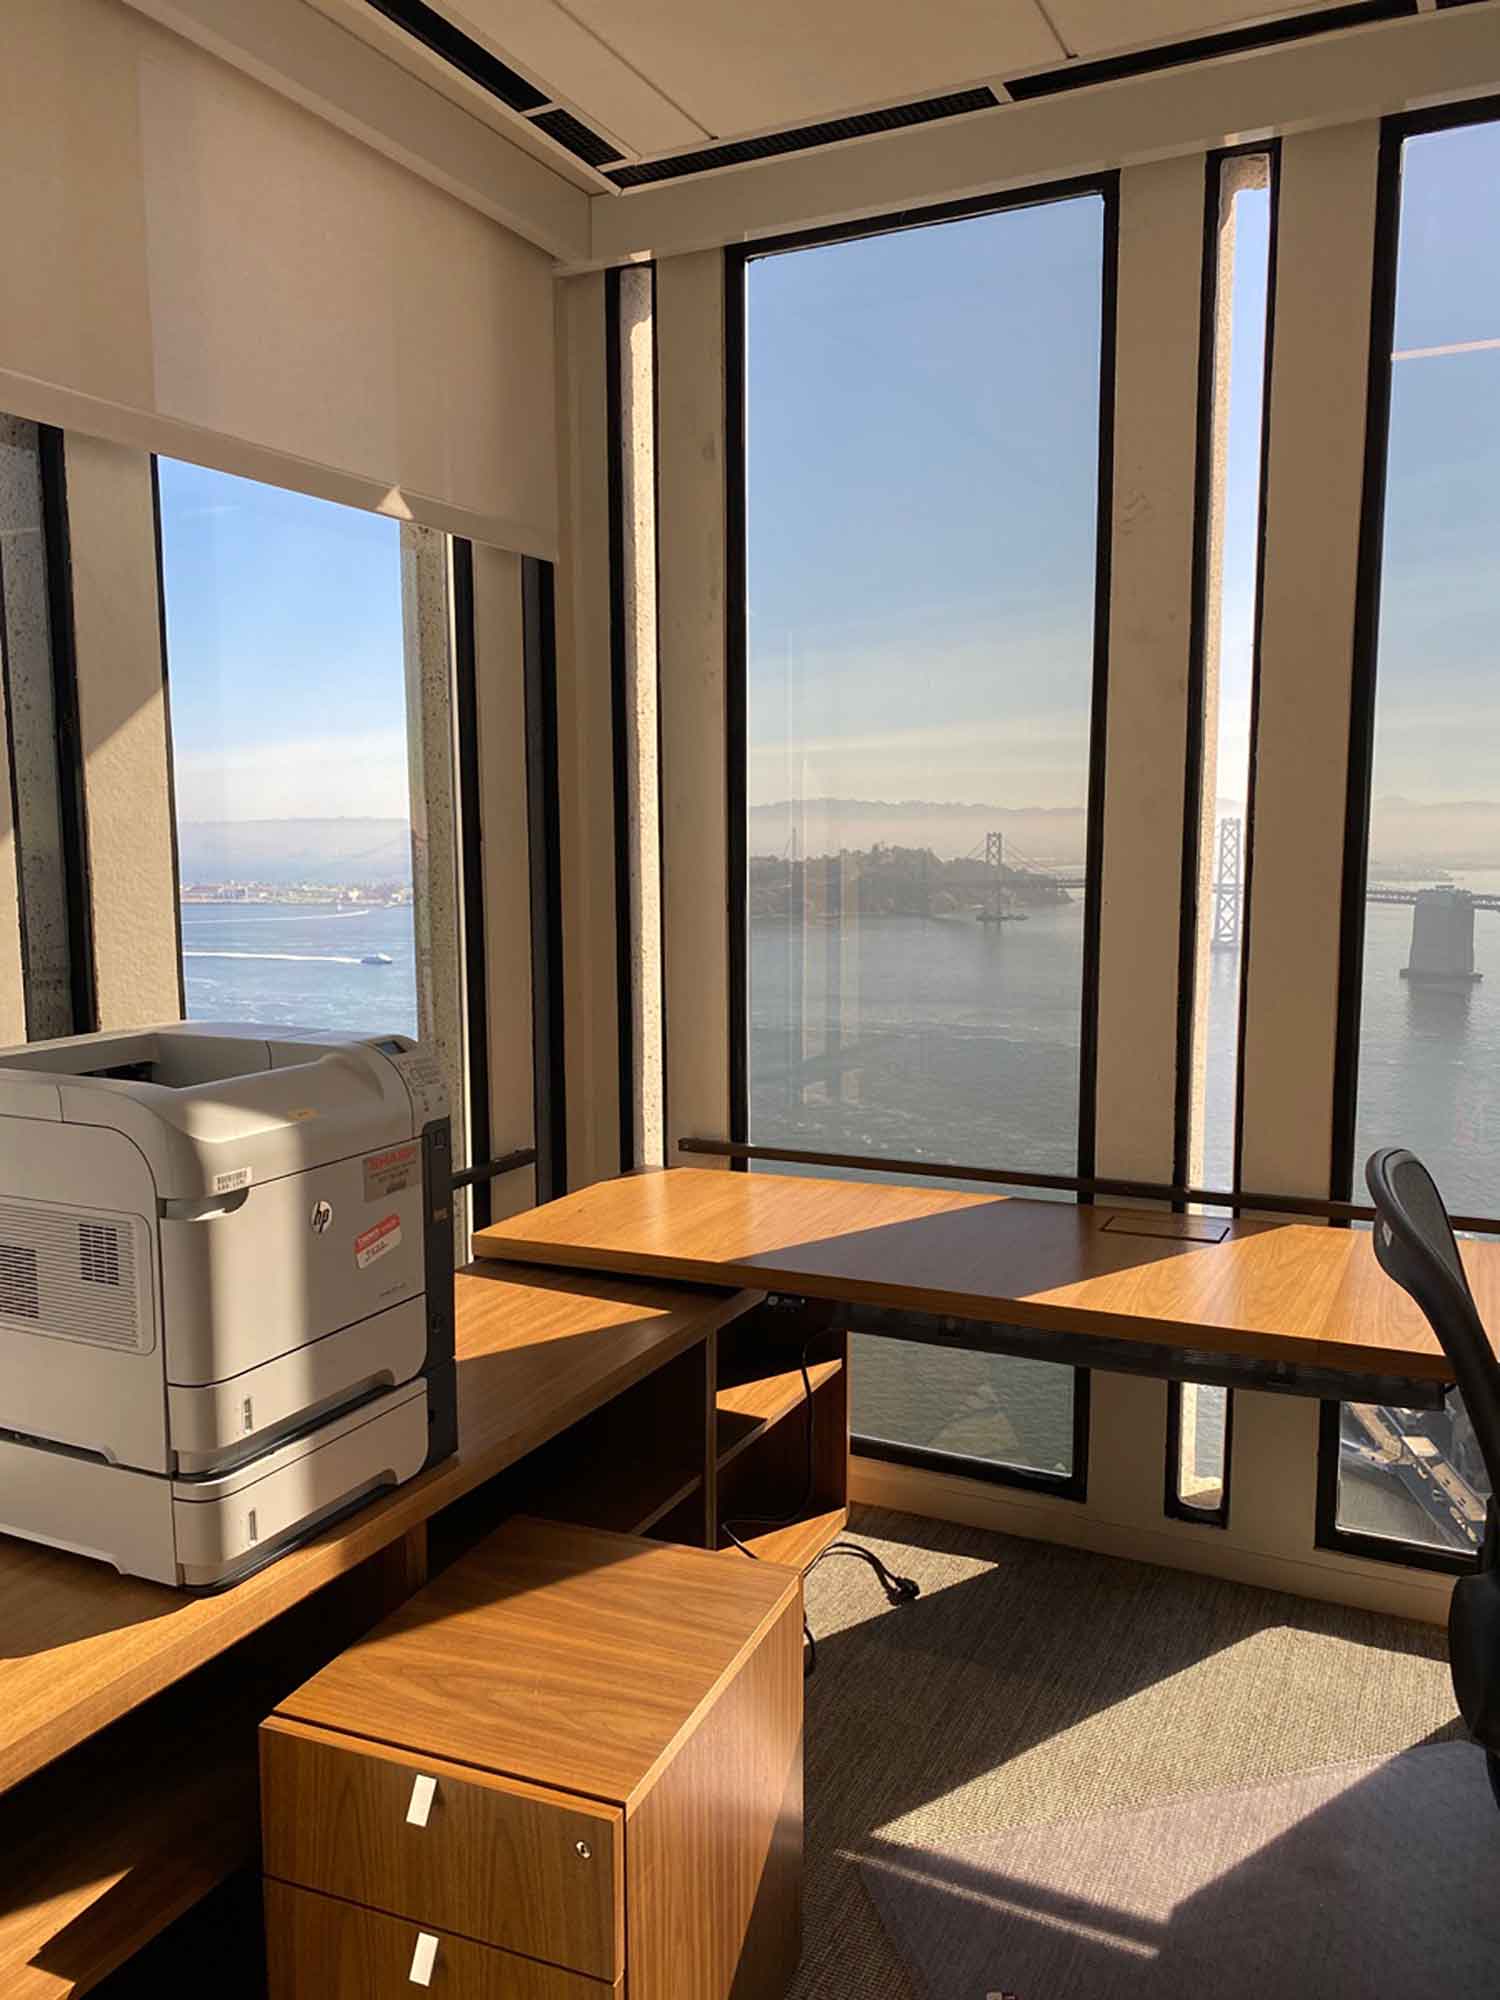 3M Night Vision Window Film makes this office in San Francisco a better place to work.